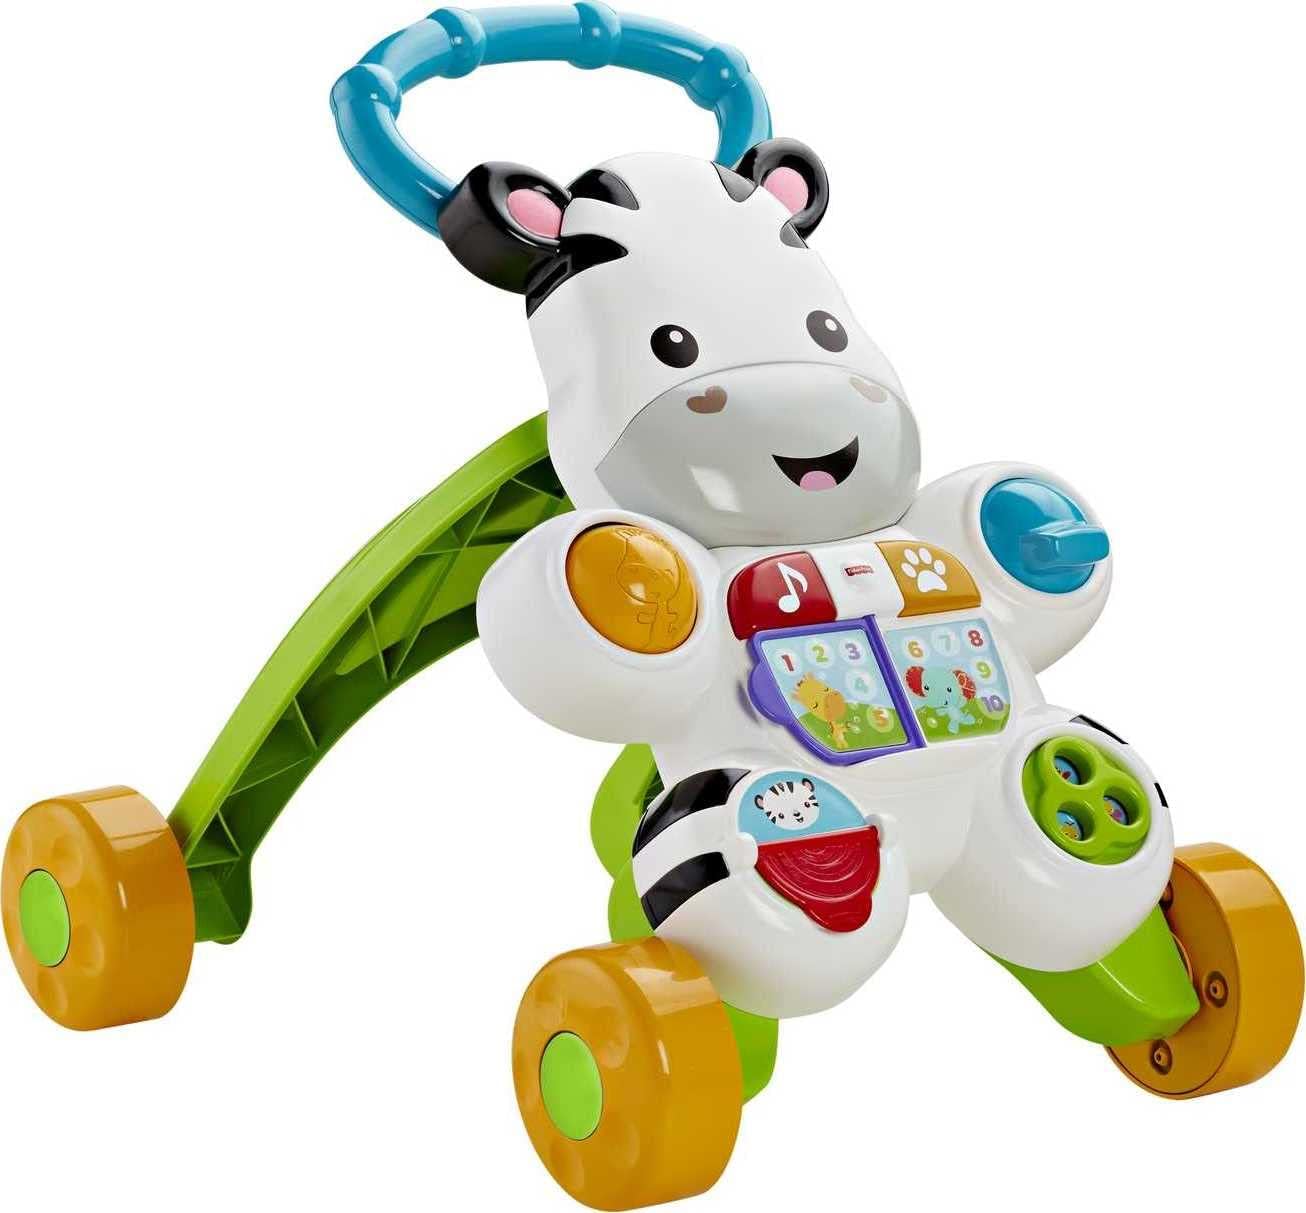 Fisher-Price Baby to Toddler Learning Toy, Learn with Me Zebra Walker with Music Lights and Activities for Ages 6+ Months - Hatke